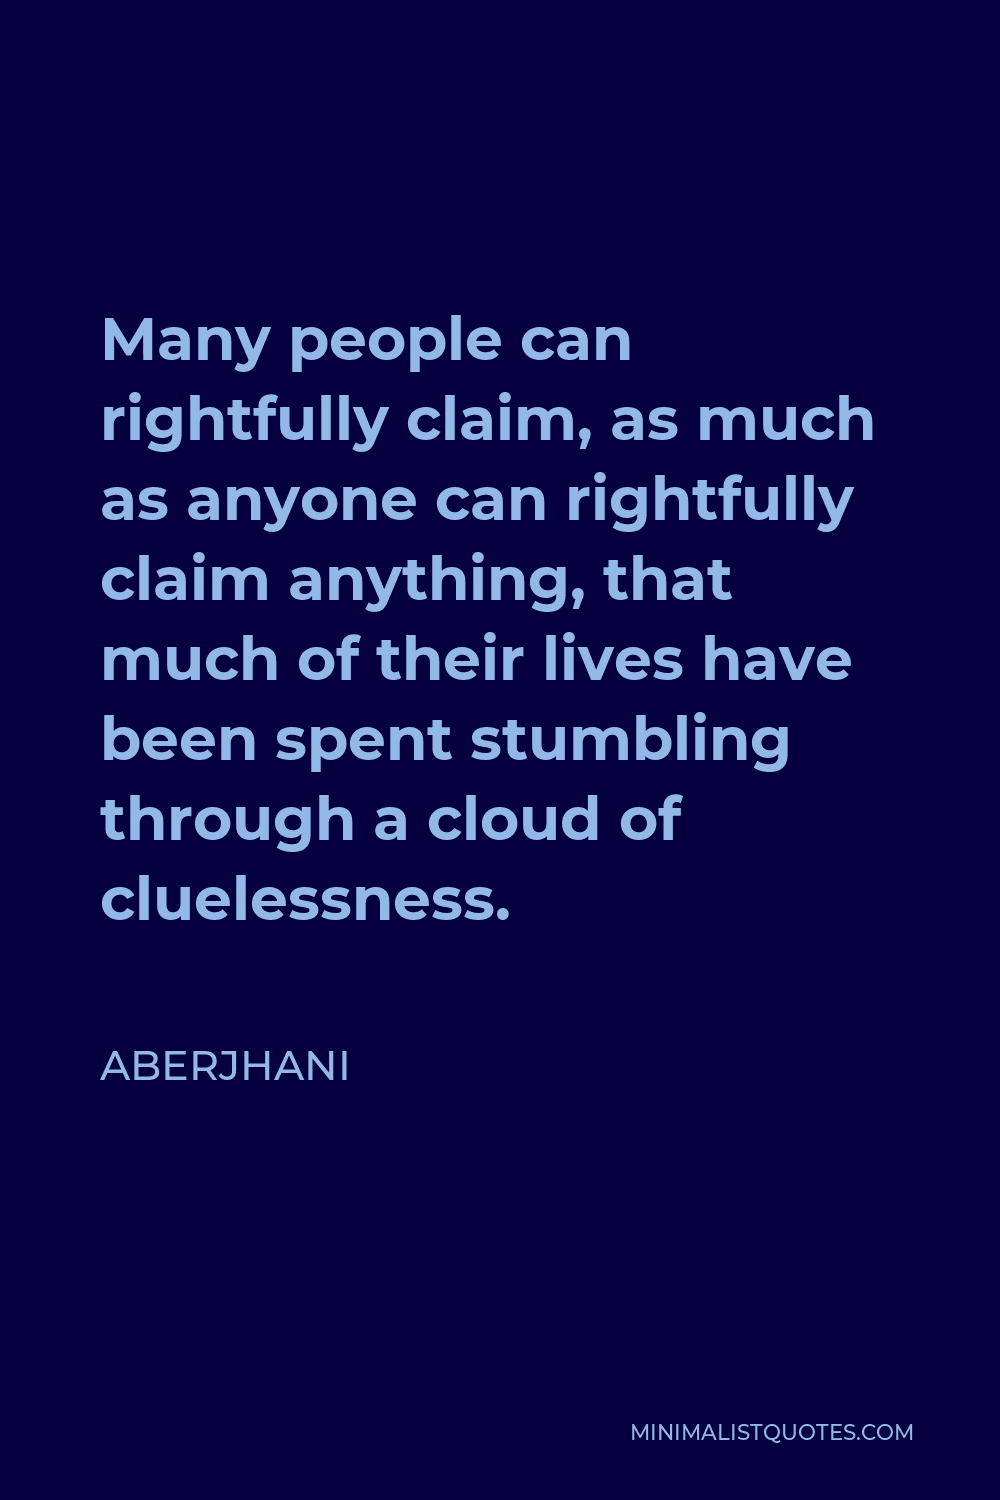 Aberjhani Quote Many people can rightfully claim, as much as anyone